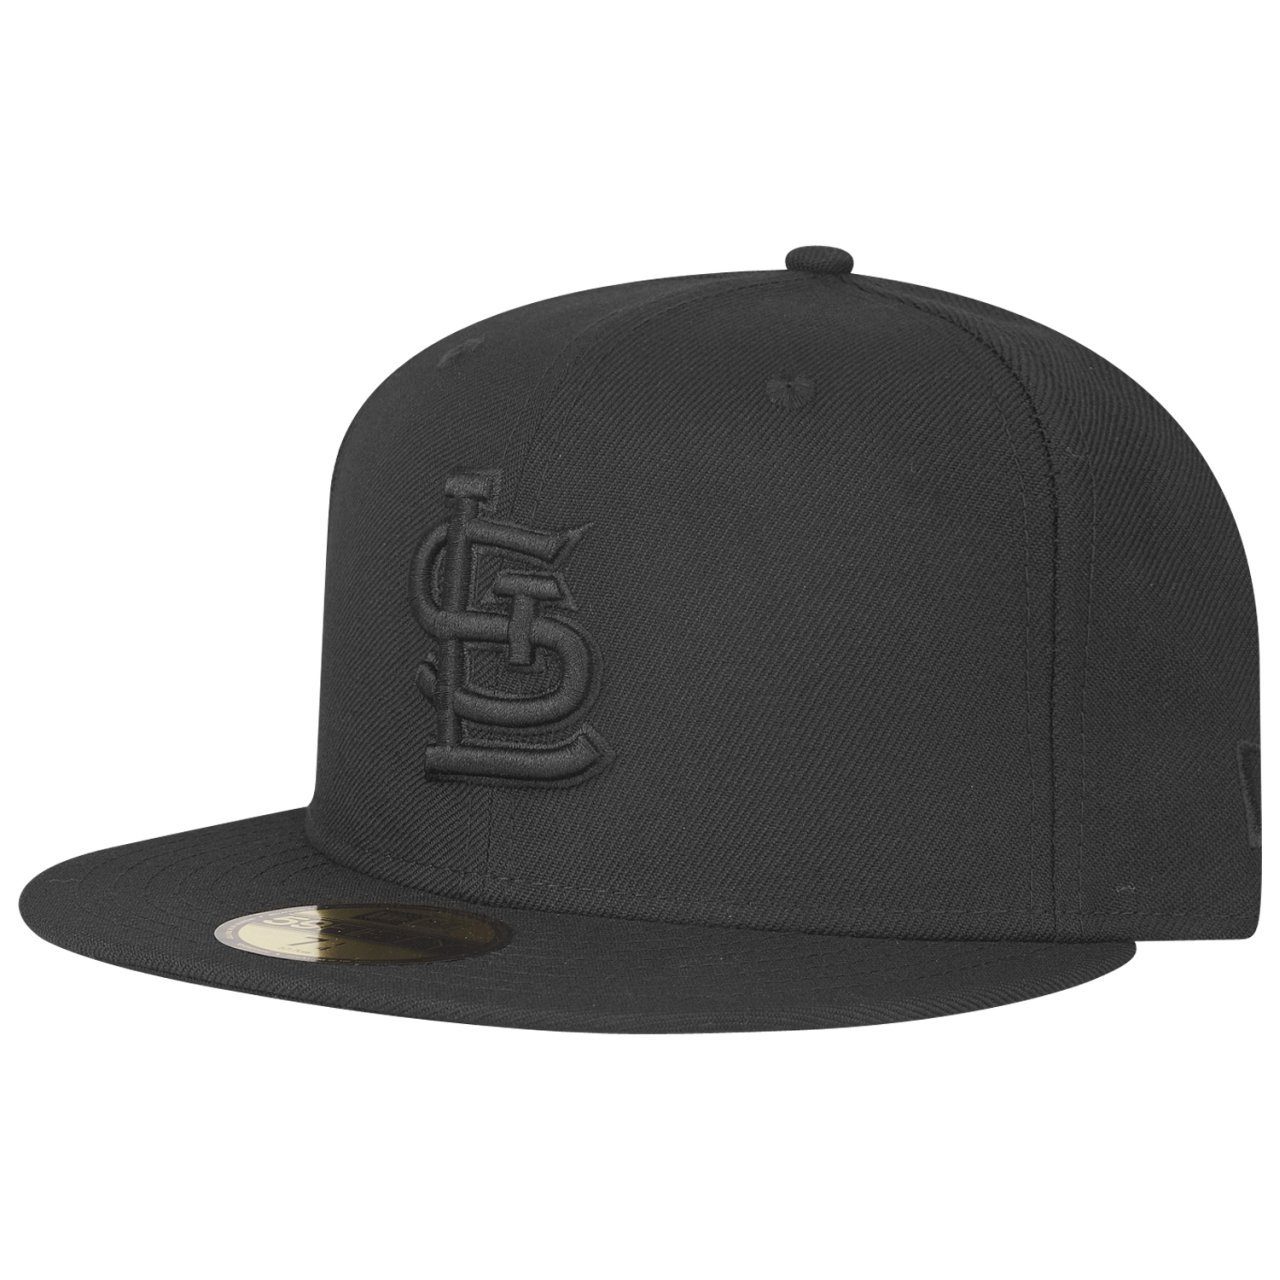 Fitted St. Cap 59Fifty MLB Cardinals New Era Louis